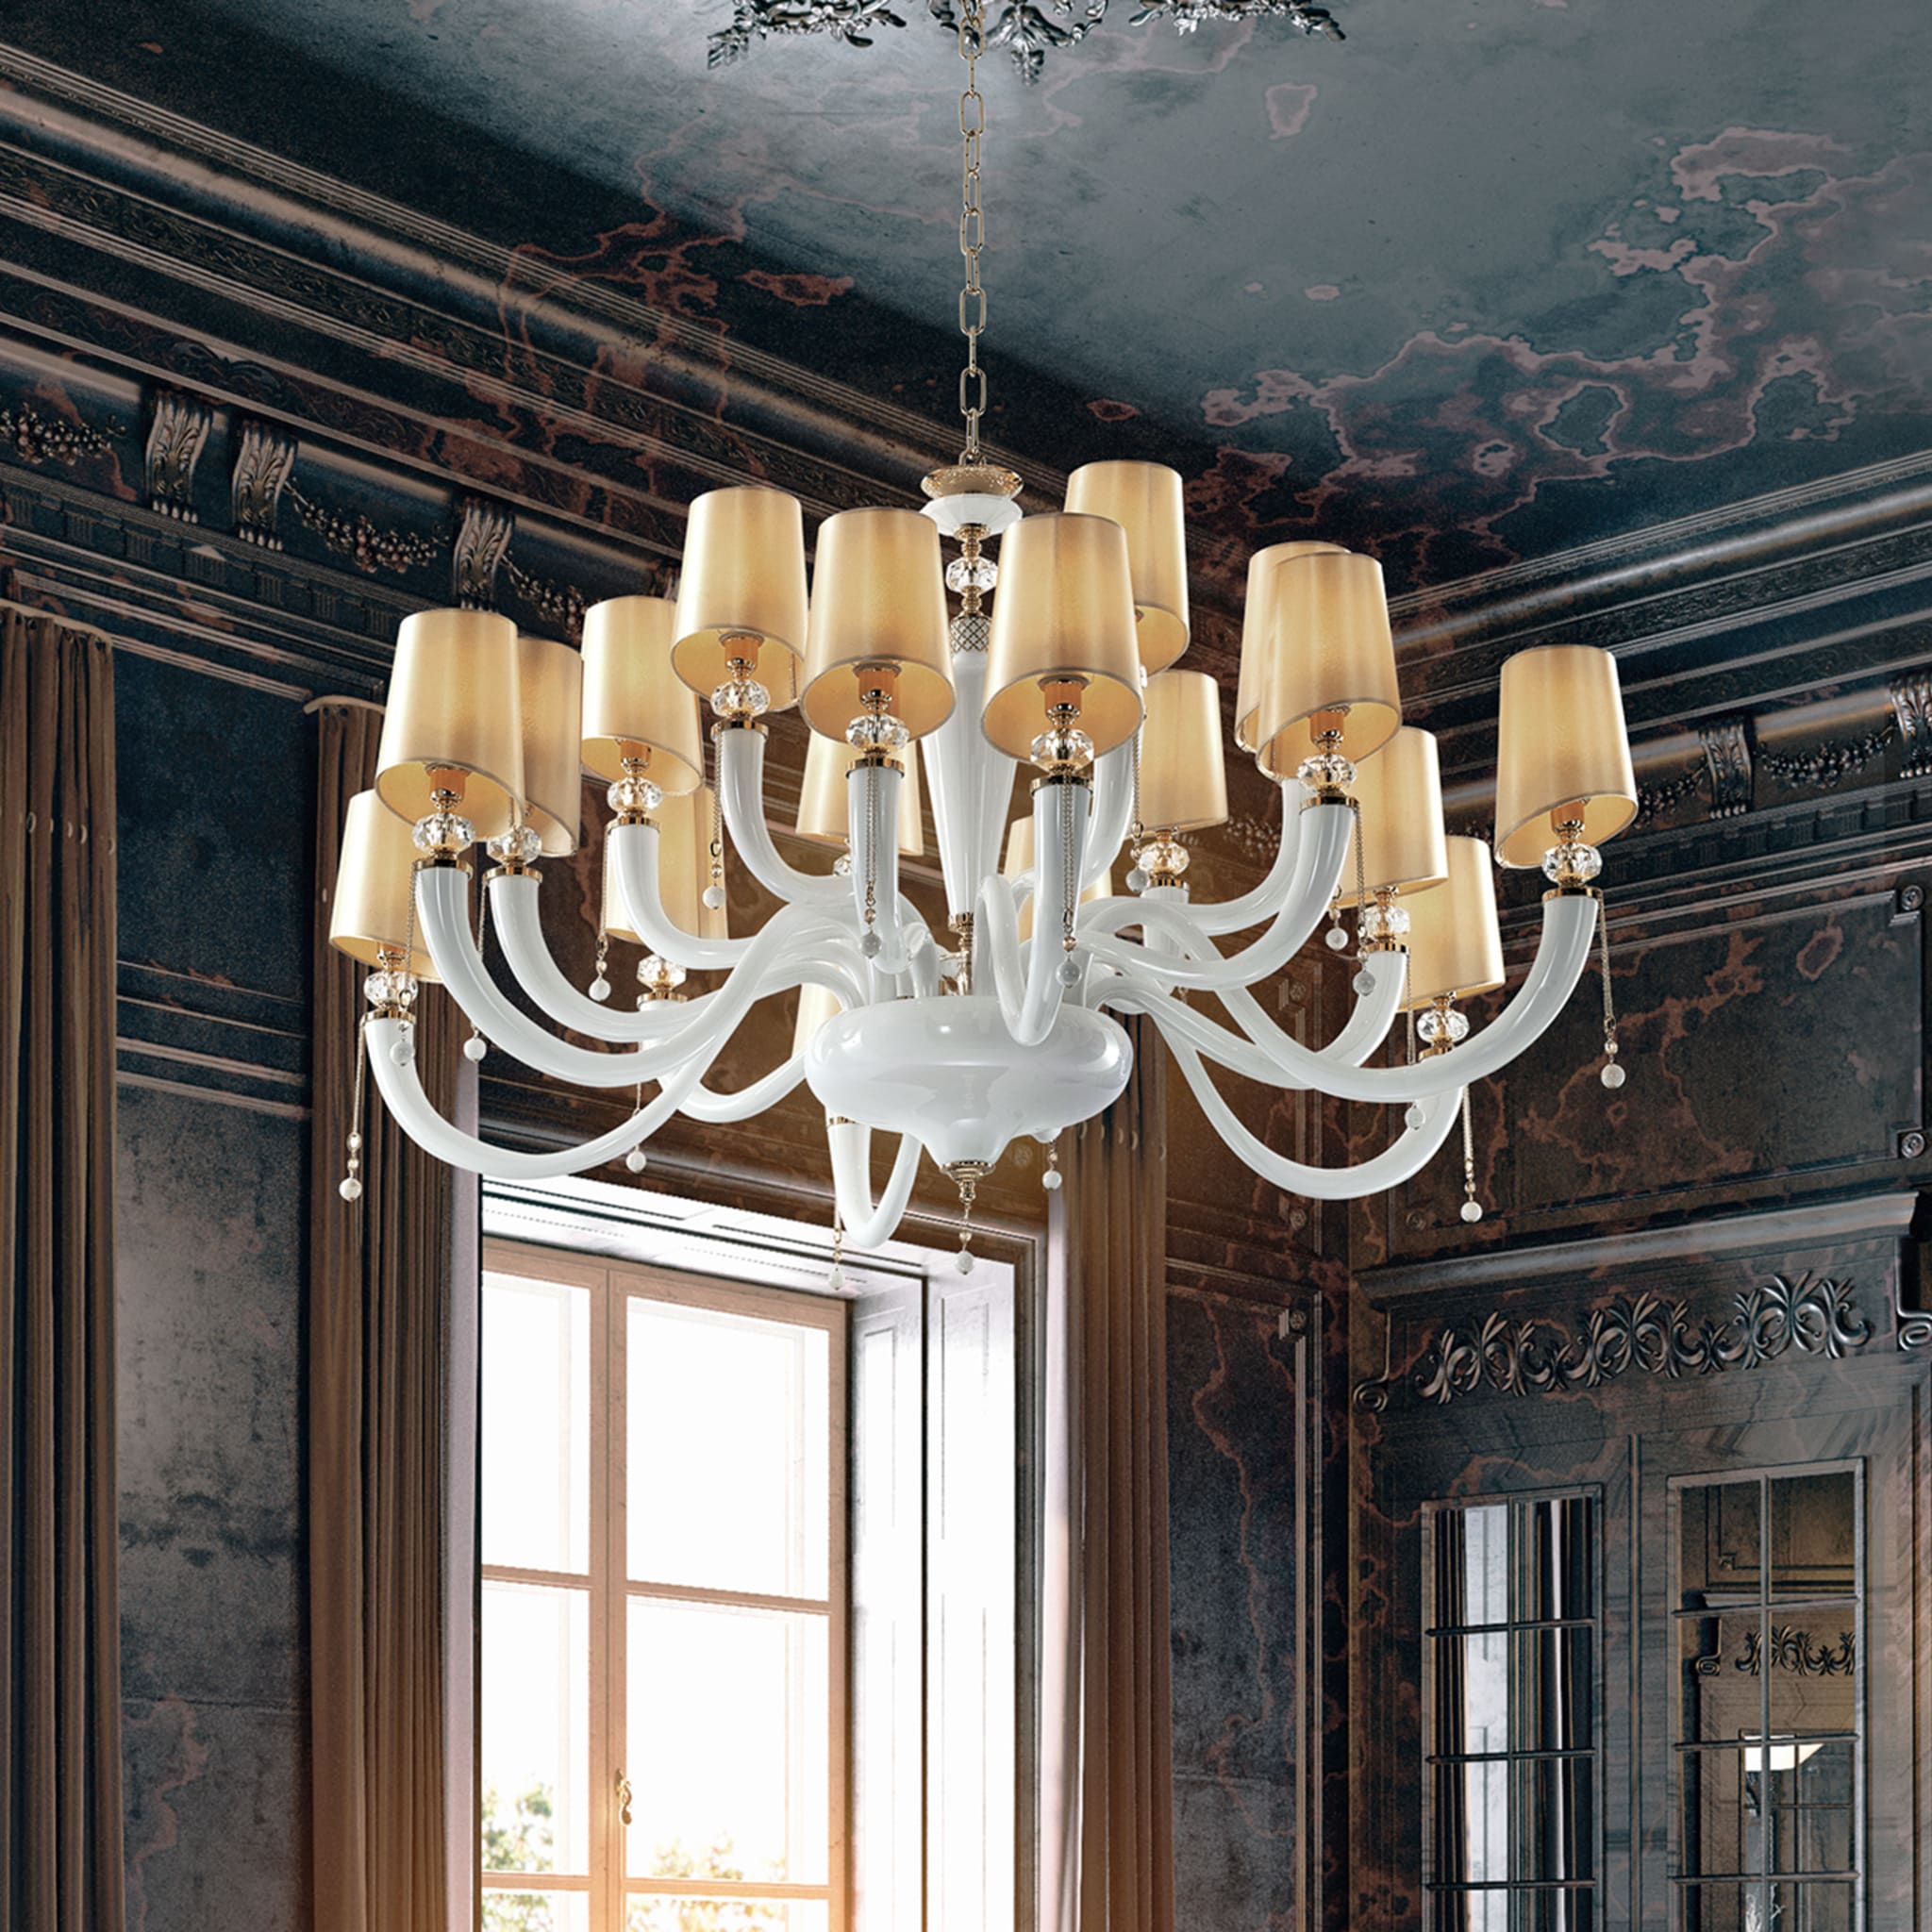 David 18-Light White and Gold Chandelier - Alternative view 1